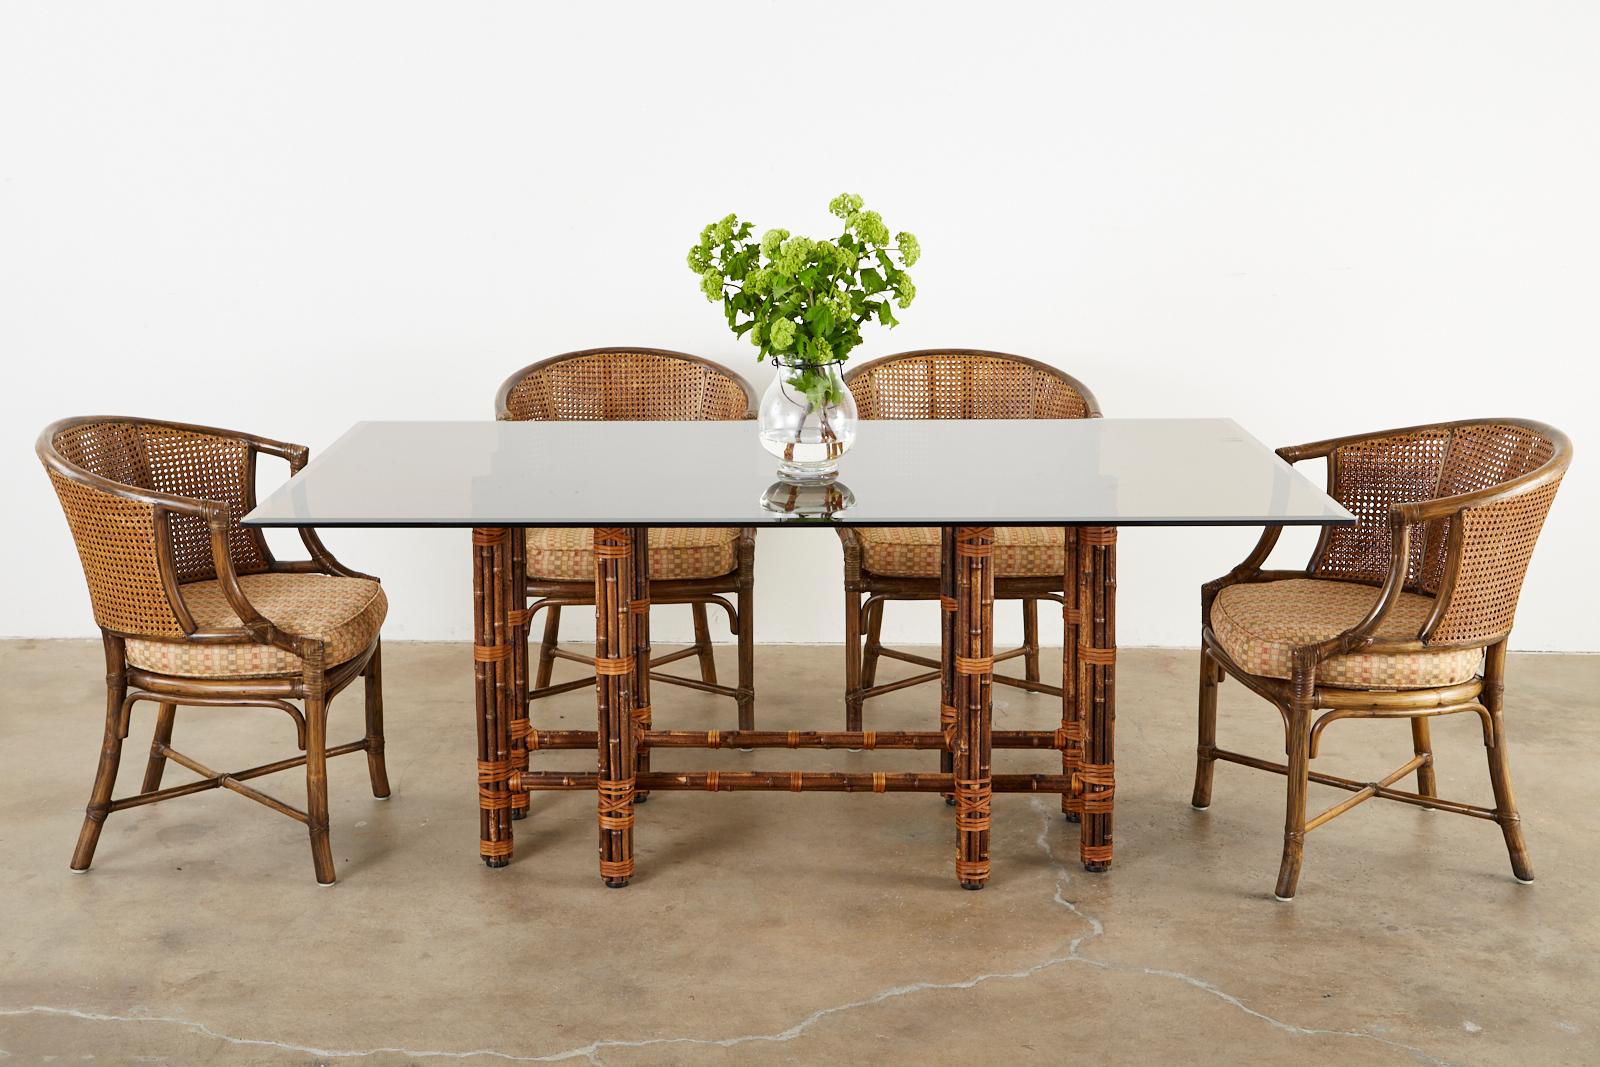 Genuine McGuire bamboo rattan glass top dining table made in the California organic modern style. The table features a rare rectangular shaped iron frame painted golden gate orange for McGuire authenticity. It is covered with bamboo poles lashed